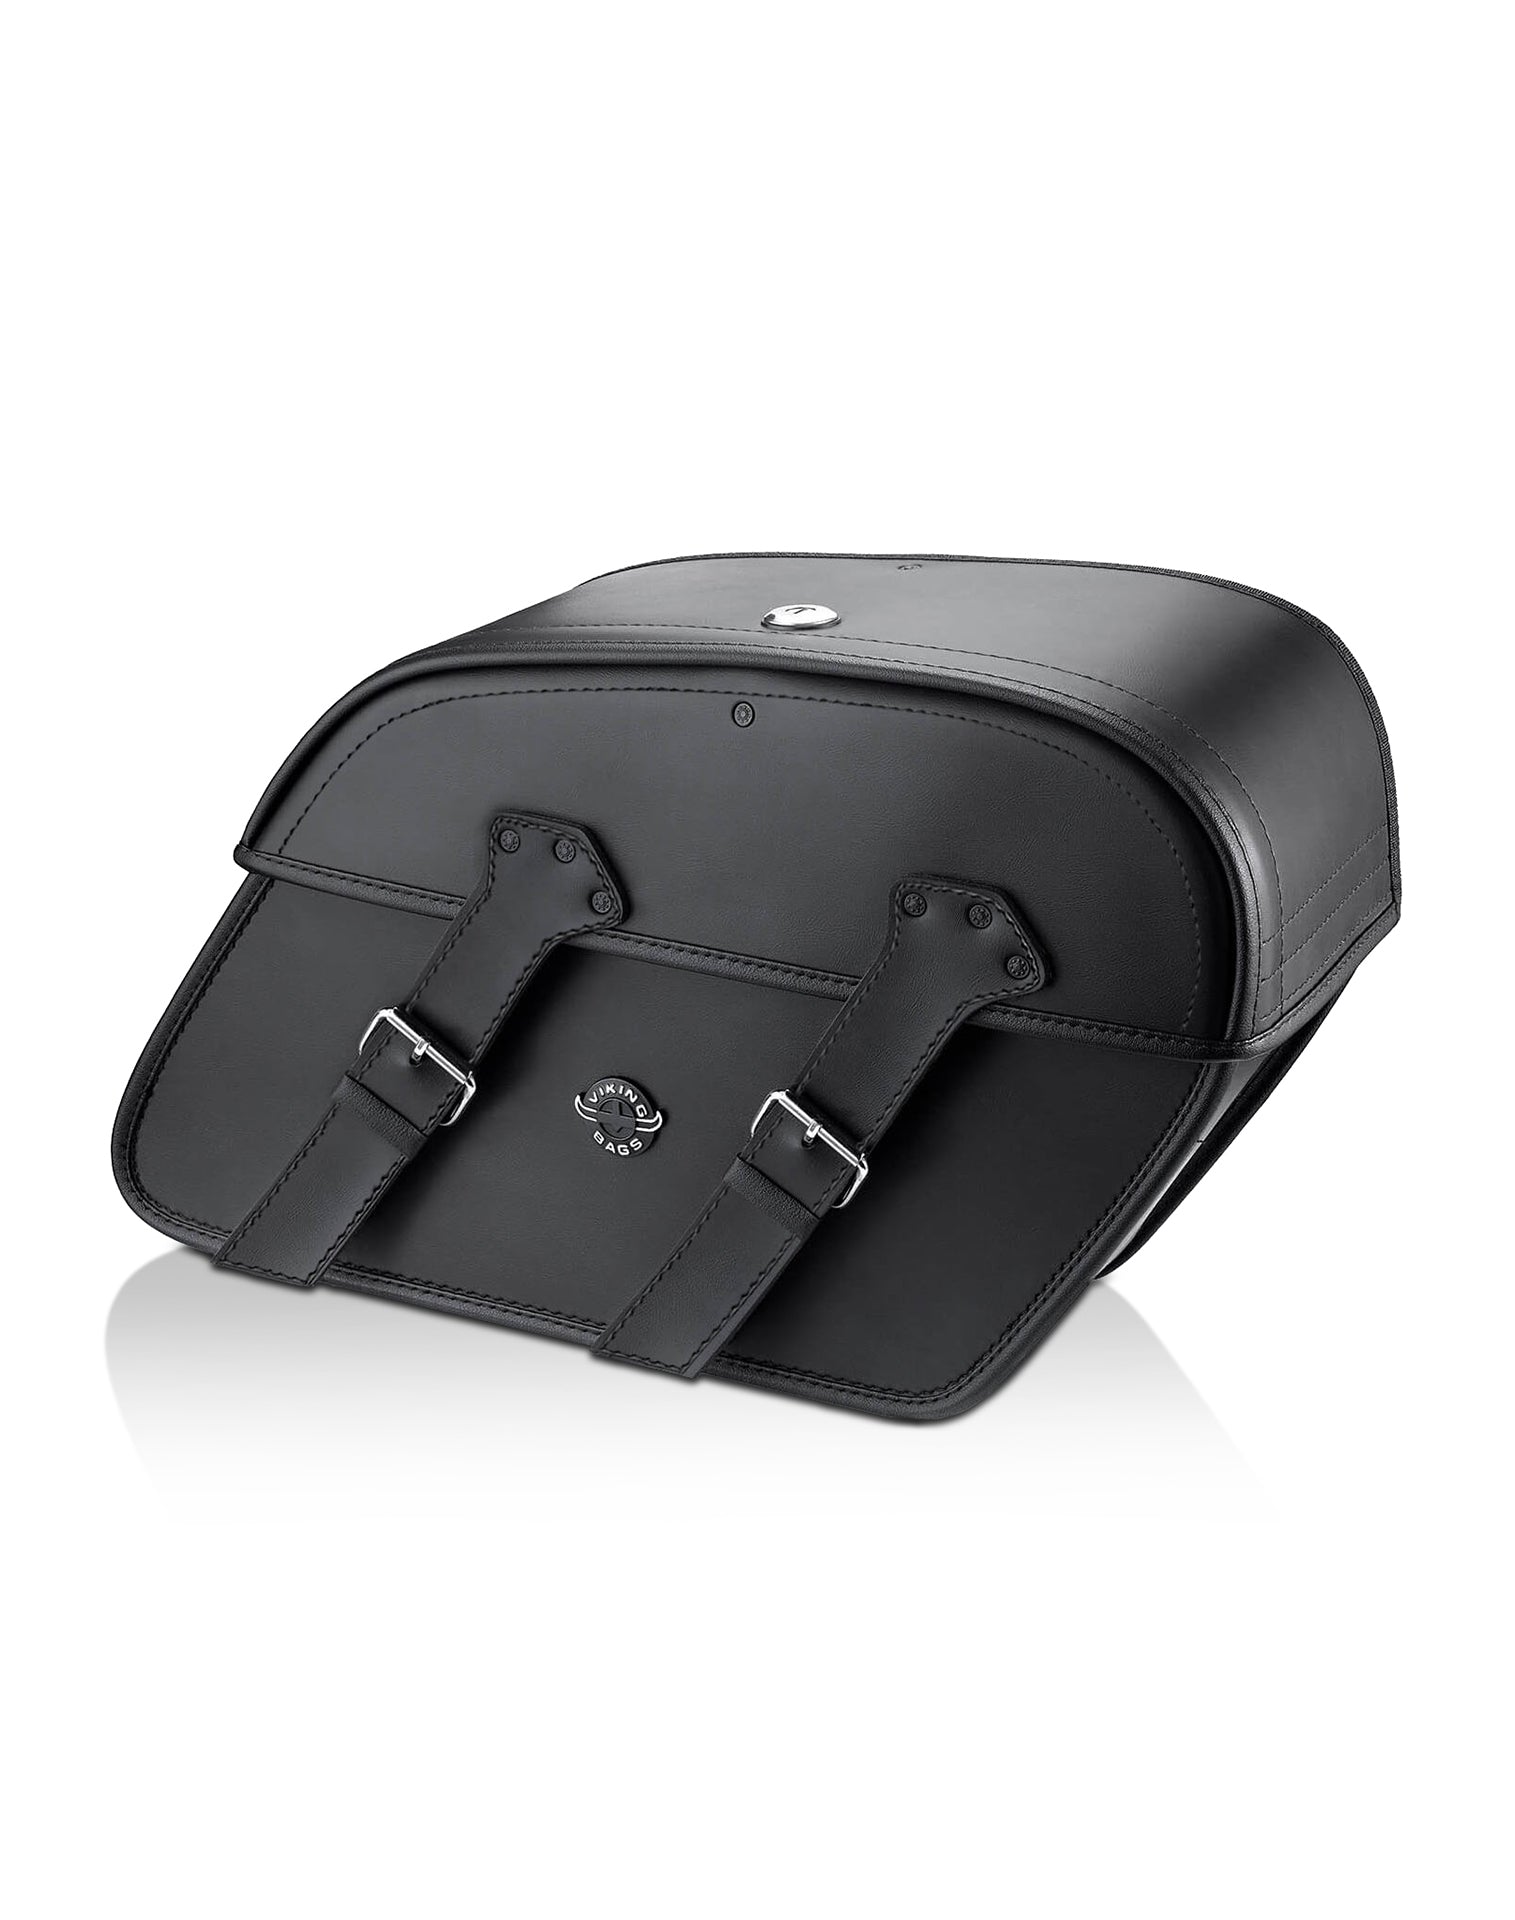 Viking Raven Large Motorcycle Leather Saddlebags For Harley Softail Sport Glide Flsb Main View